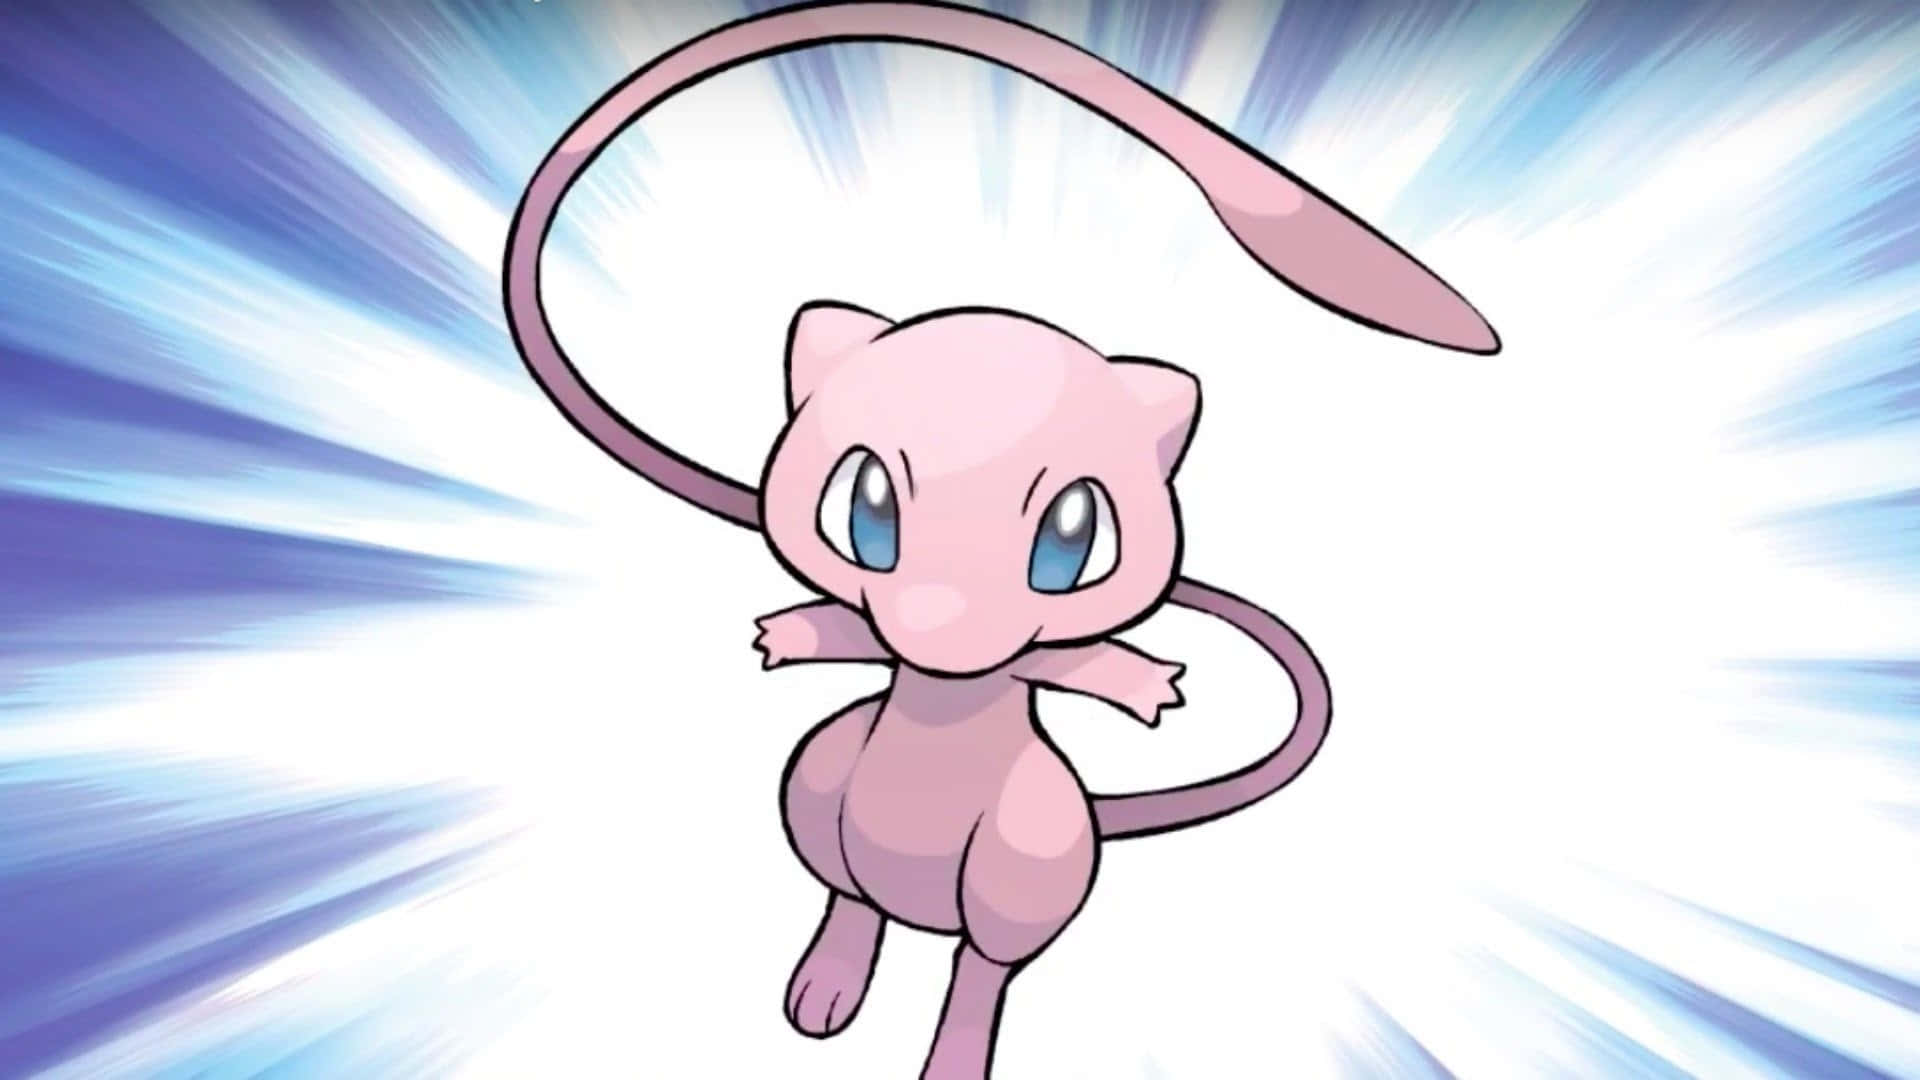 Download Cute Mew Pokemon with a Happy Expression | Wallpapers.com